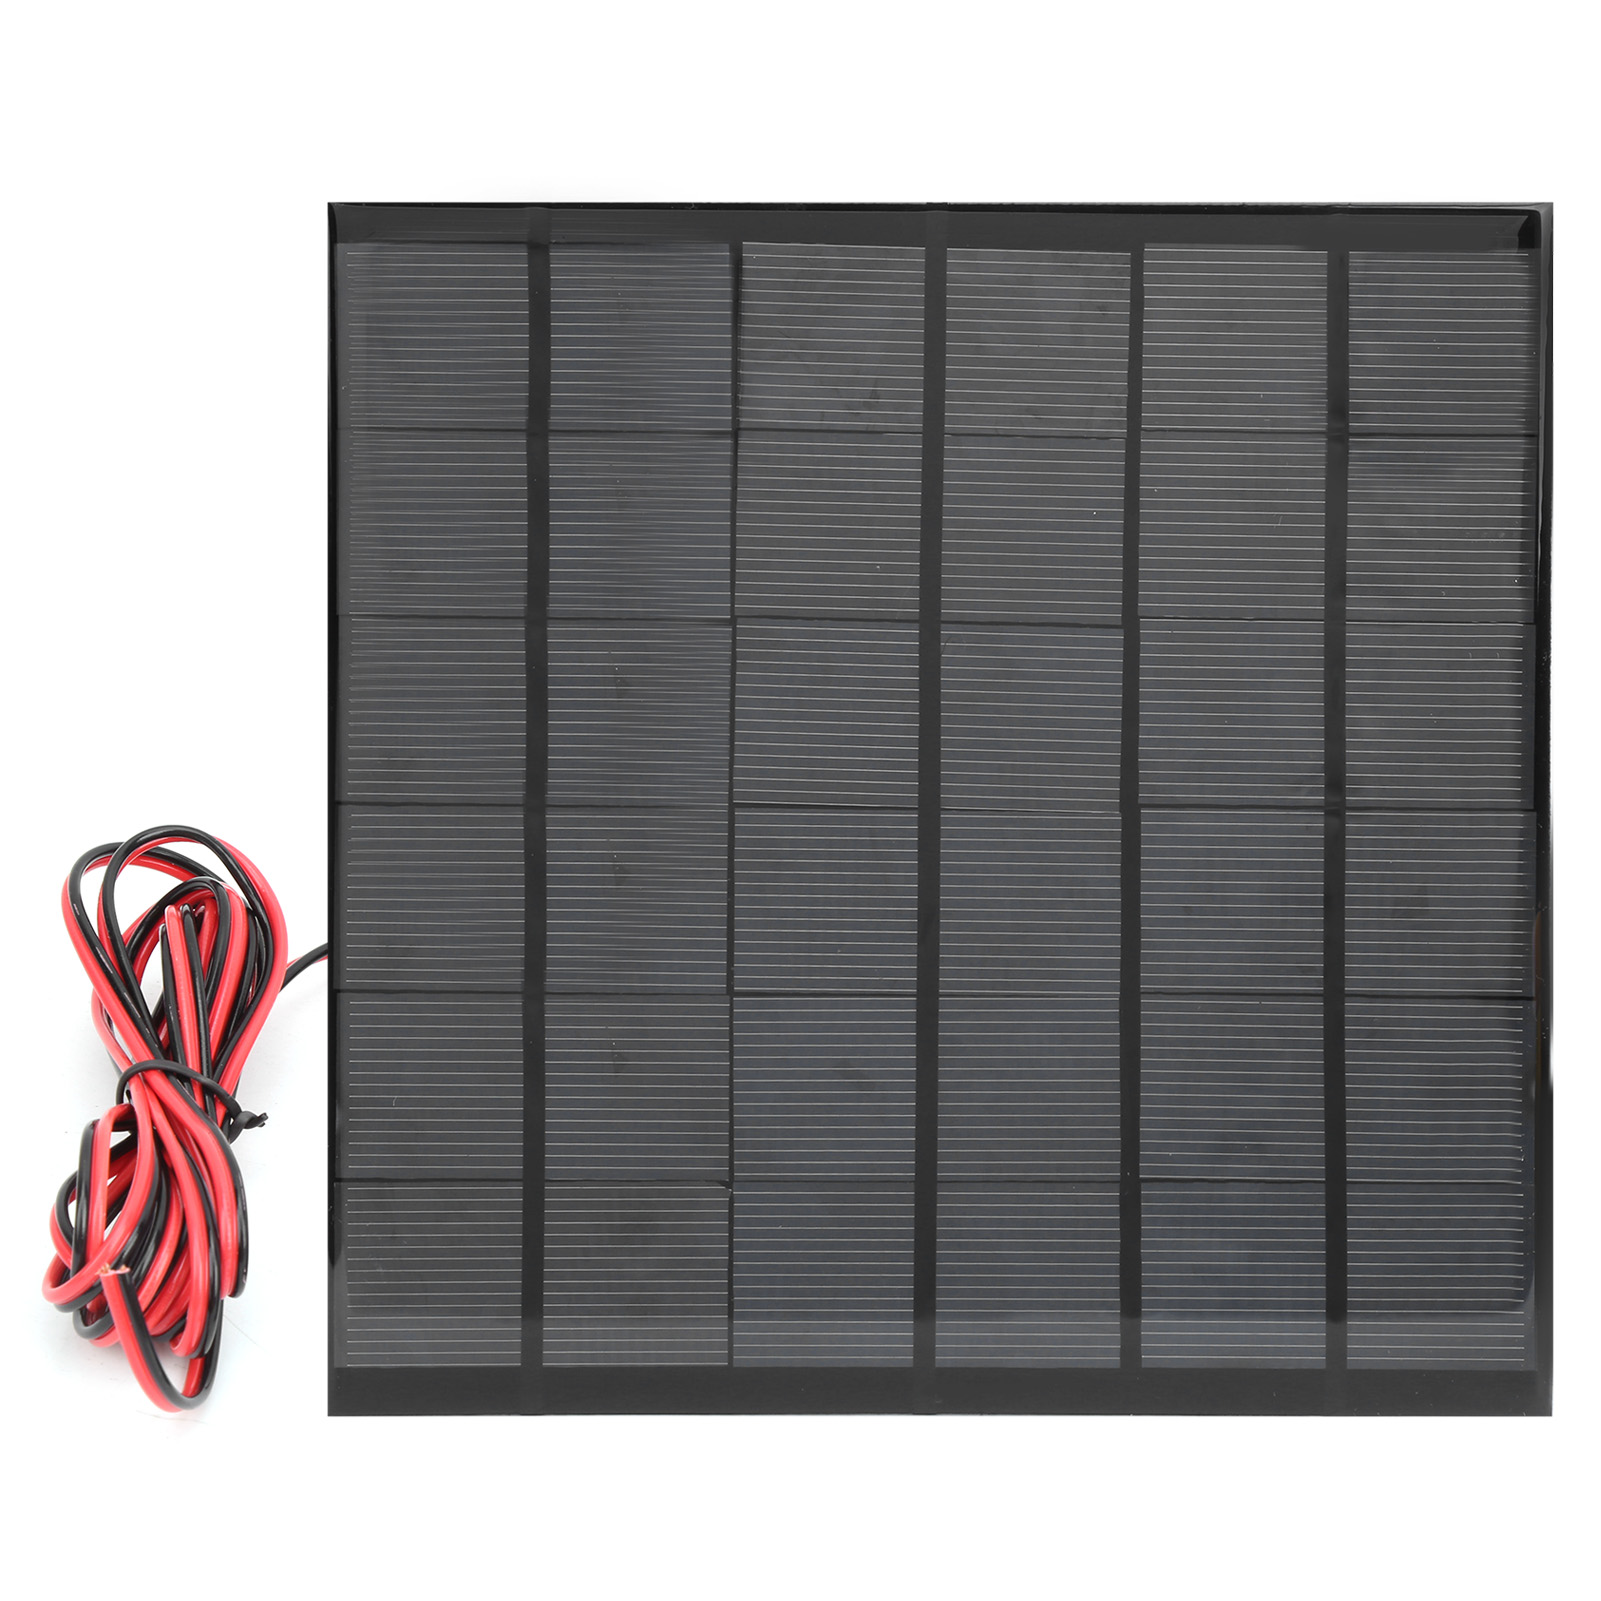 

9V 4.2W Solar Panel Cell Power Module Polycrystalline Silicon with 200cm Cable